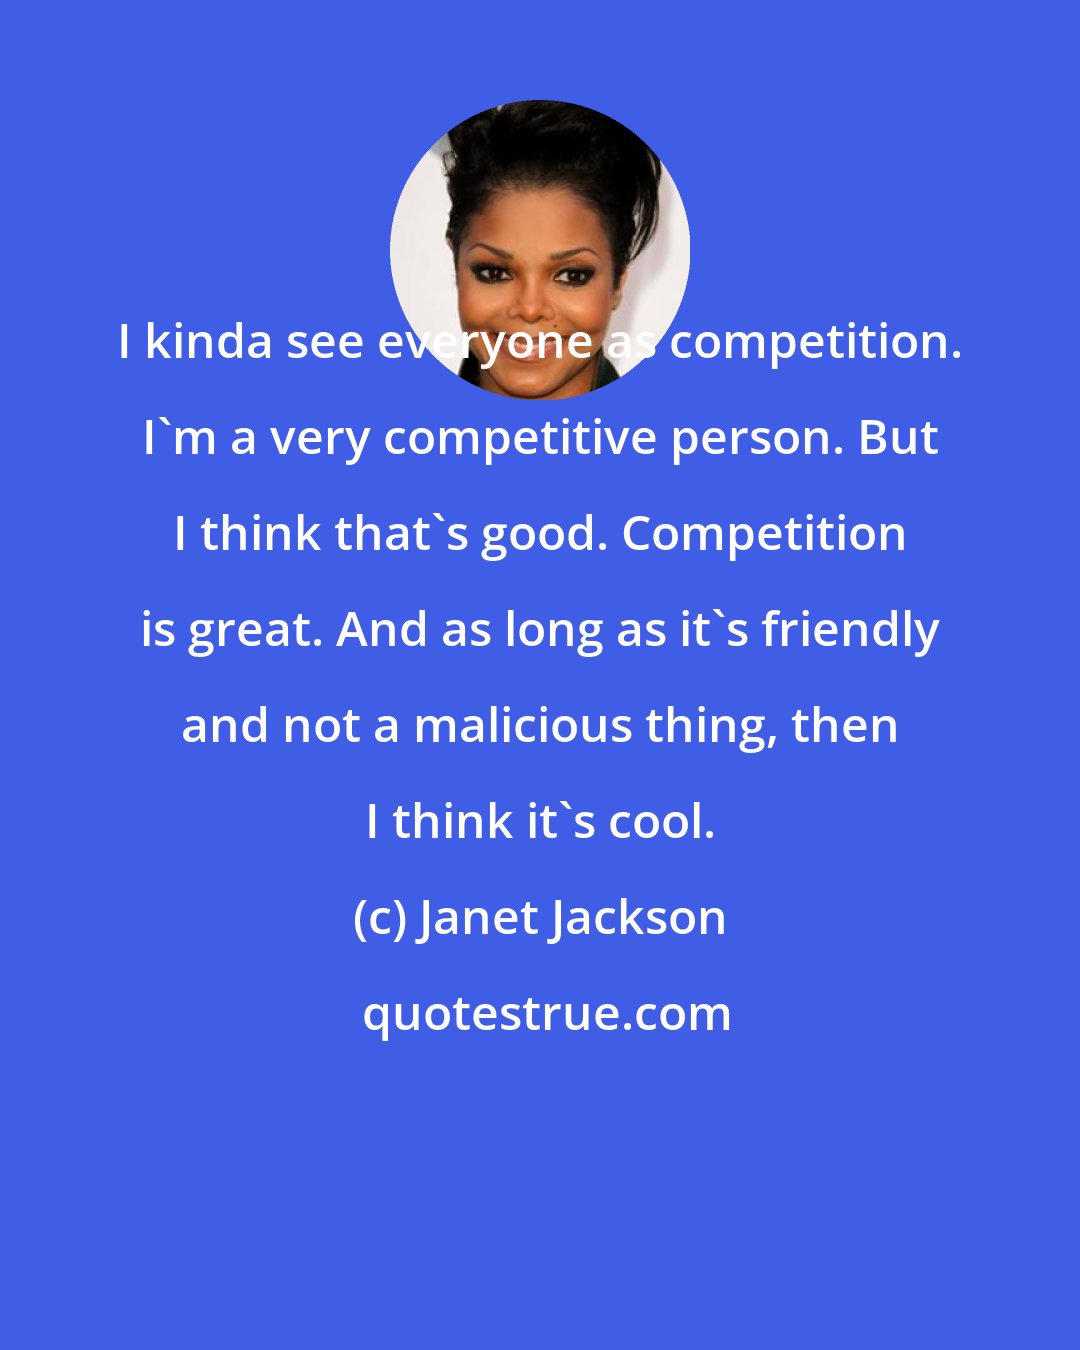 Janet Jackson: I kinda see everyone as competition. I'm a very competitive person. But I think that's good. Competition is great. And as long as it's friendly and not a malicious thing, then I think it's cool.